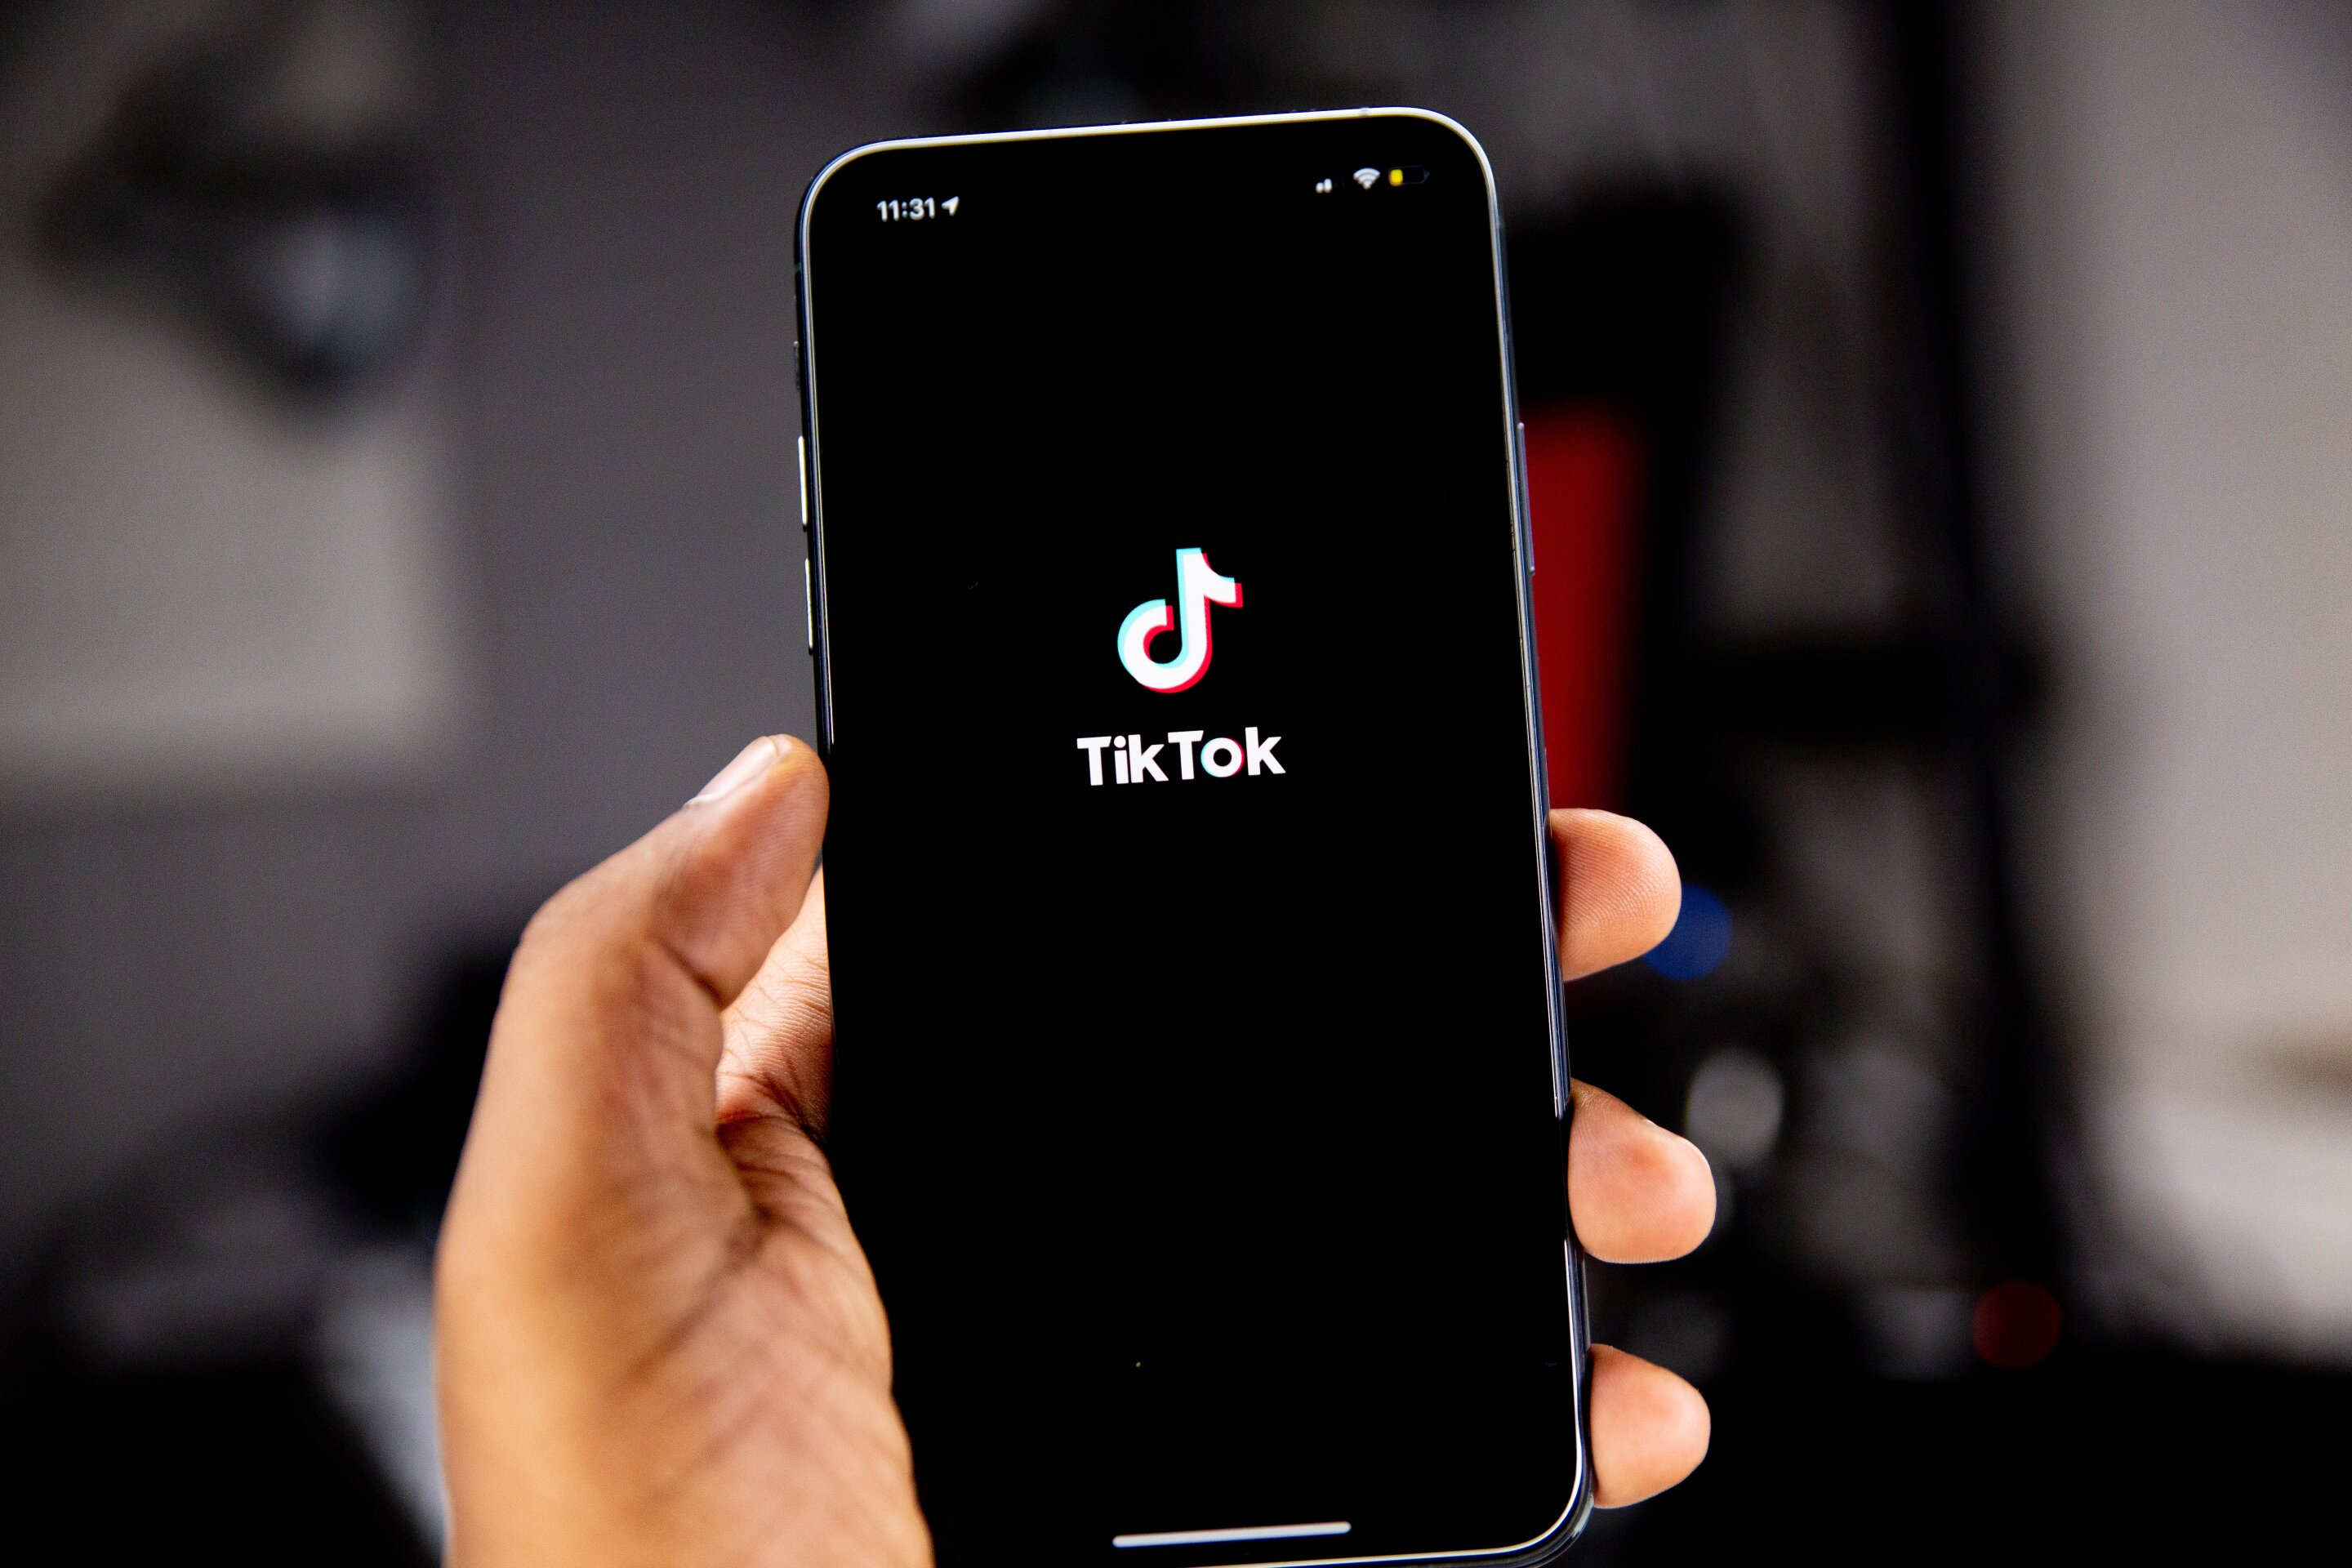 TikTok CEO to testify before US Congress in March